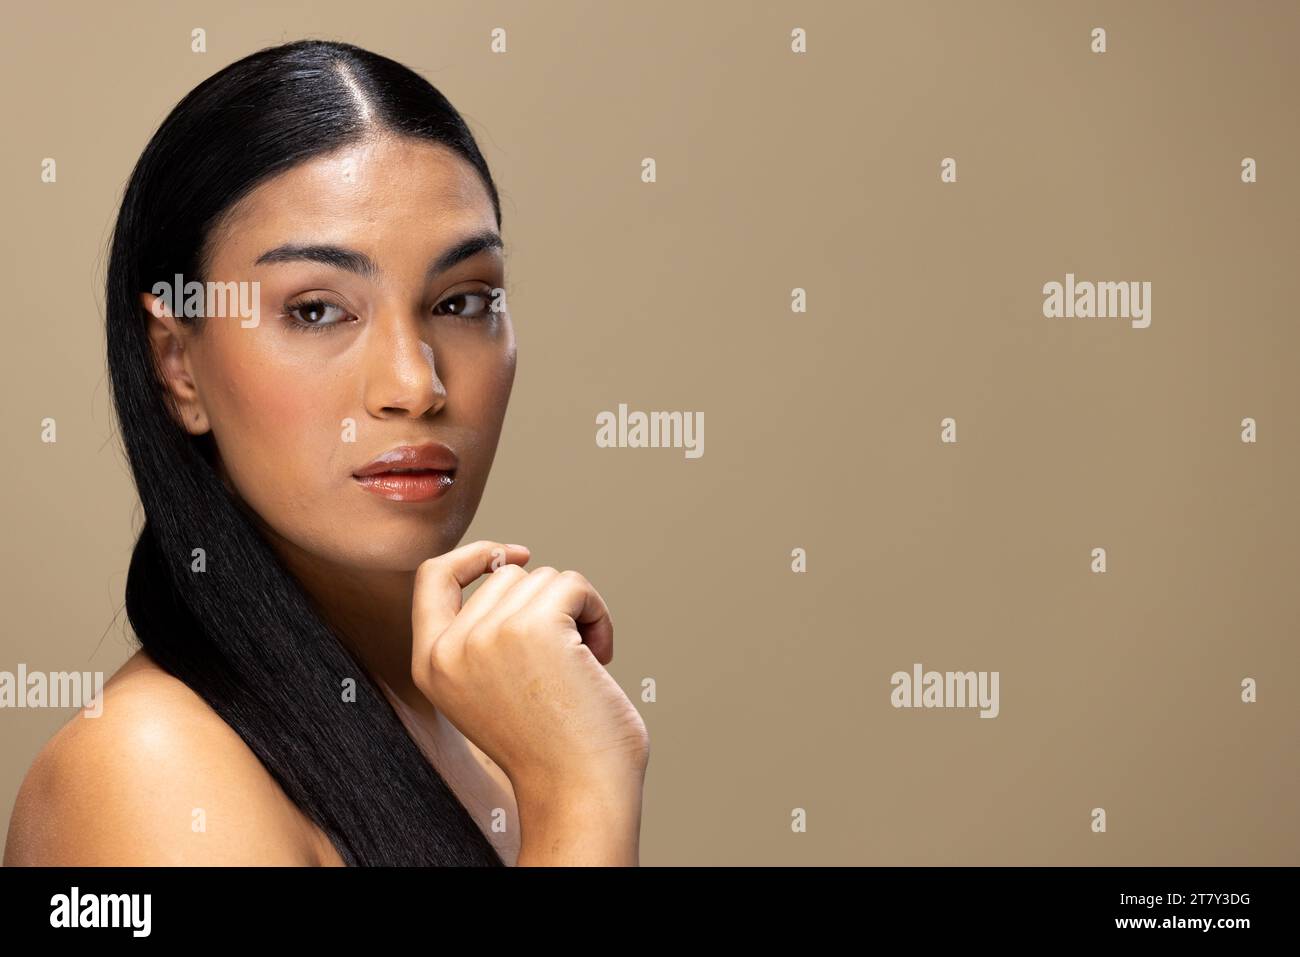 Portrait of biracial woman with dark hair and natural make up on brown background, copy space Stock Photo